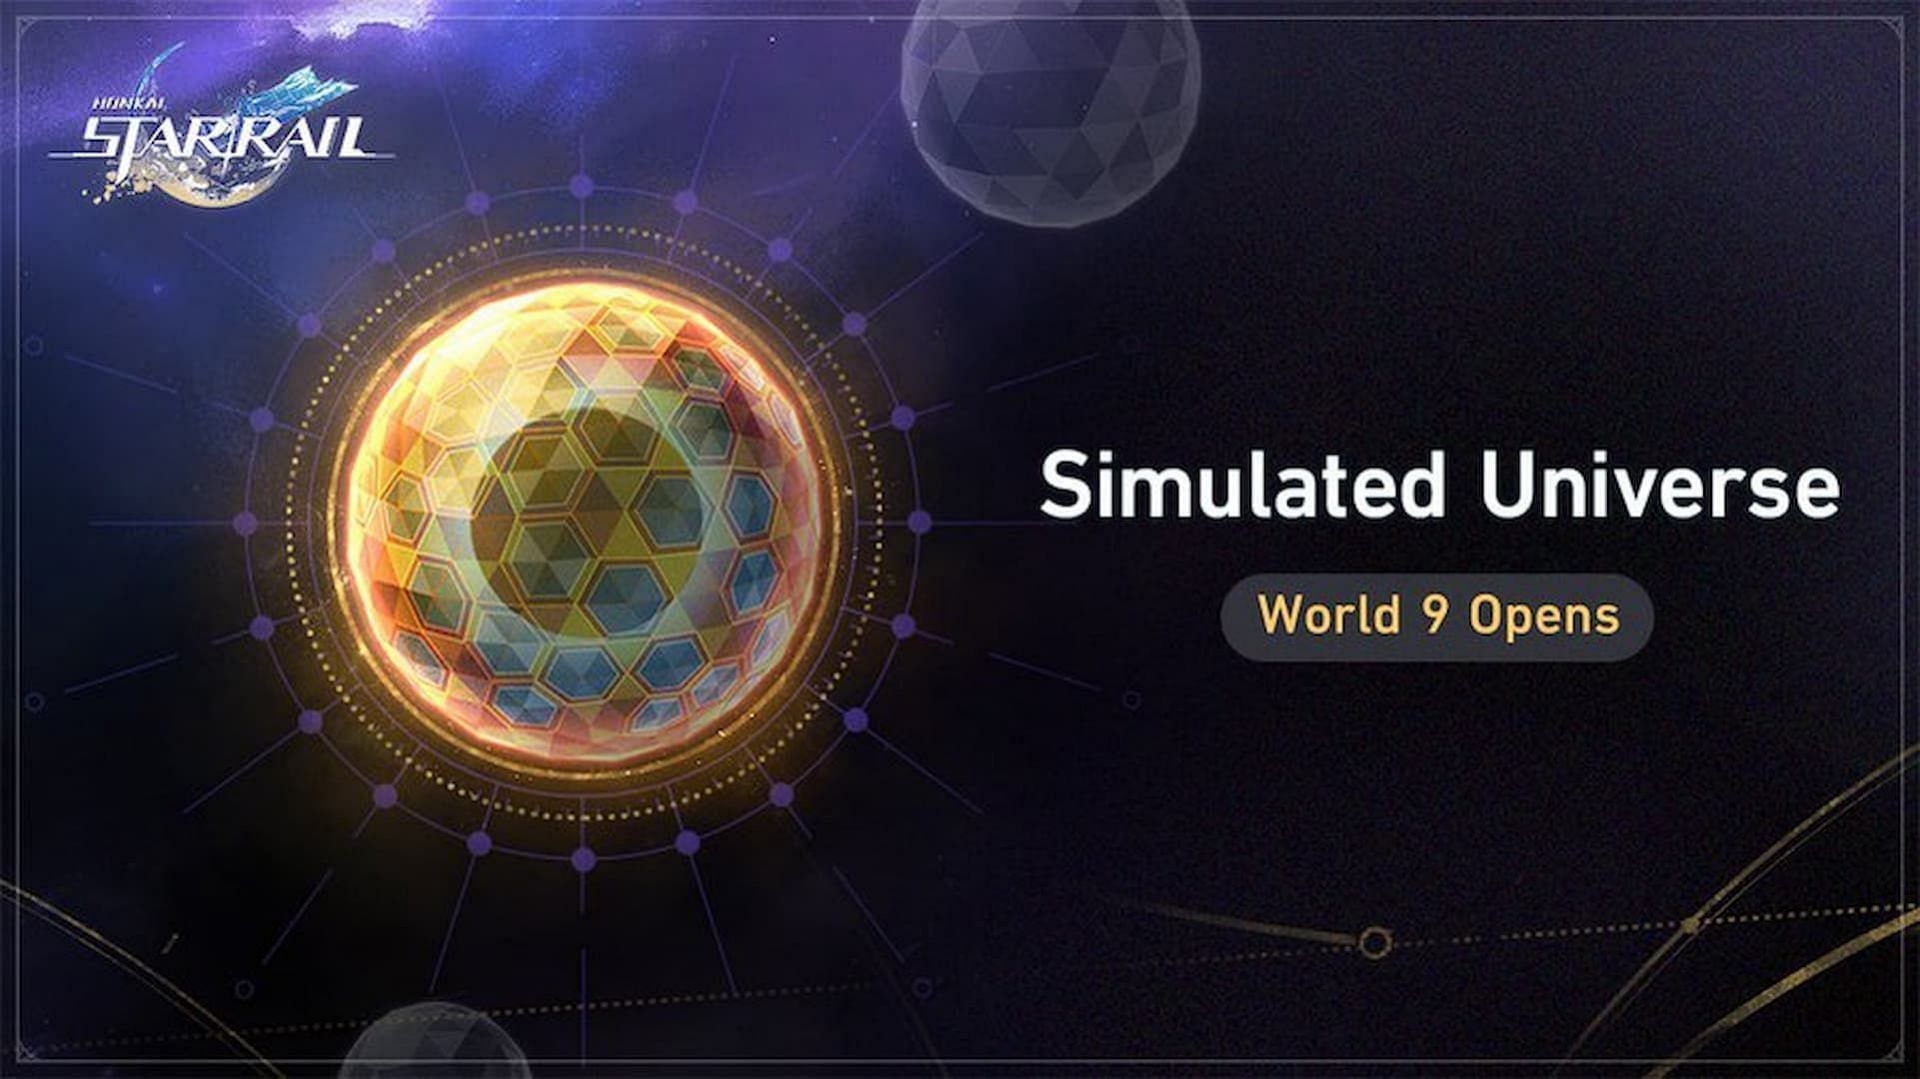 World 9 of Simulated Universe is gonna be in game in the next patch 2.1(Image via HoYoverse)